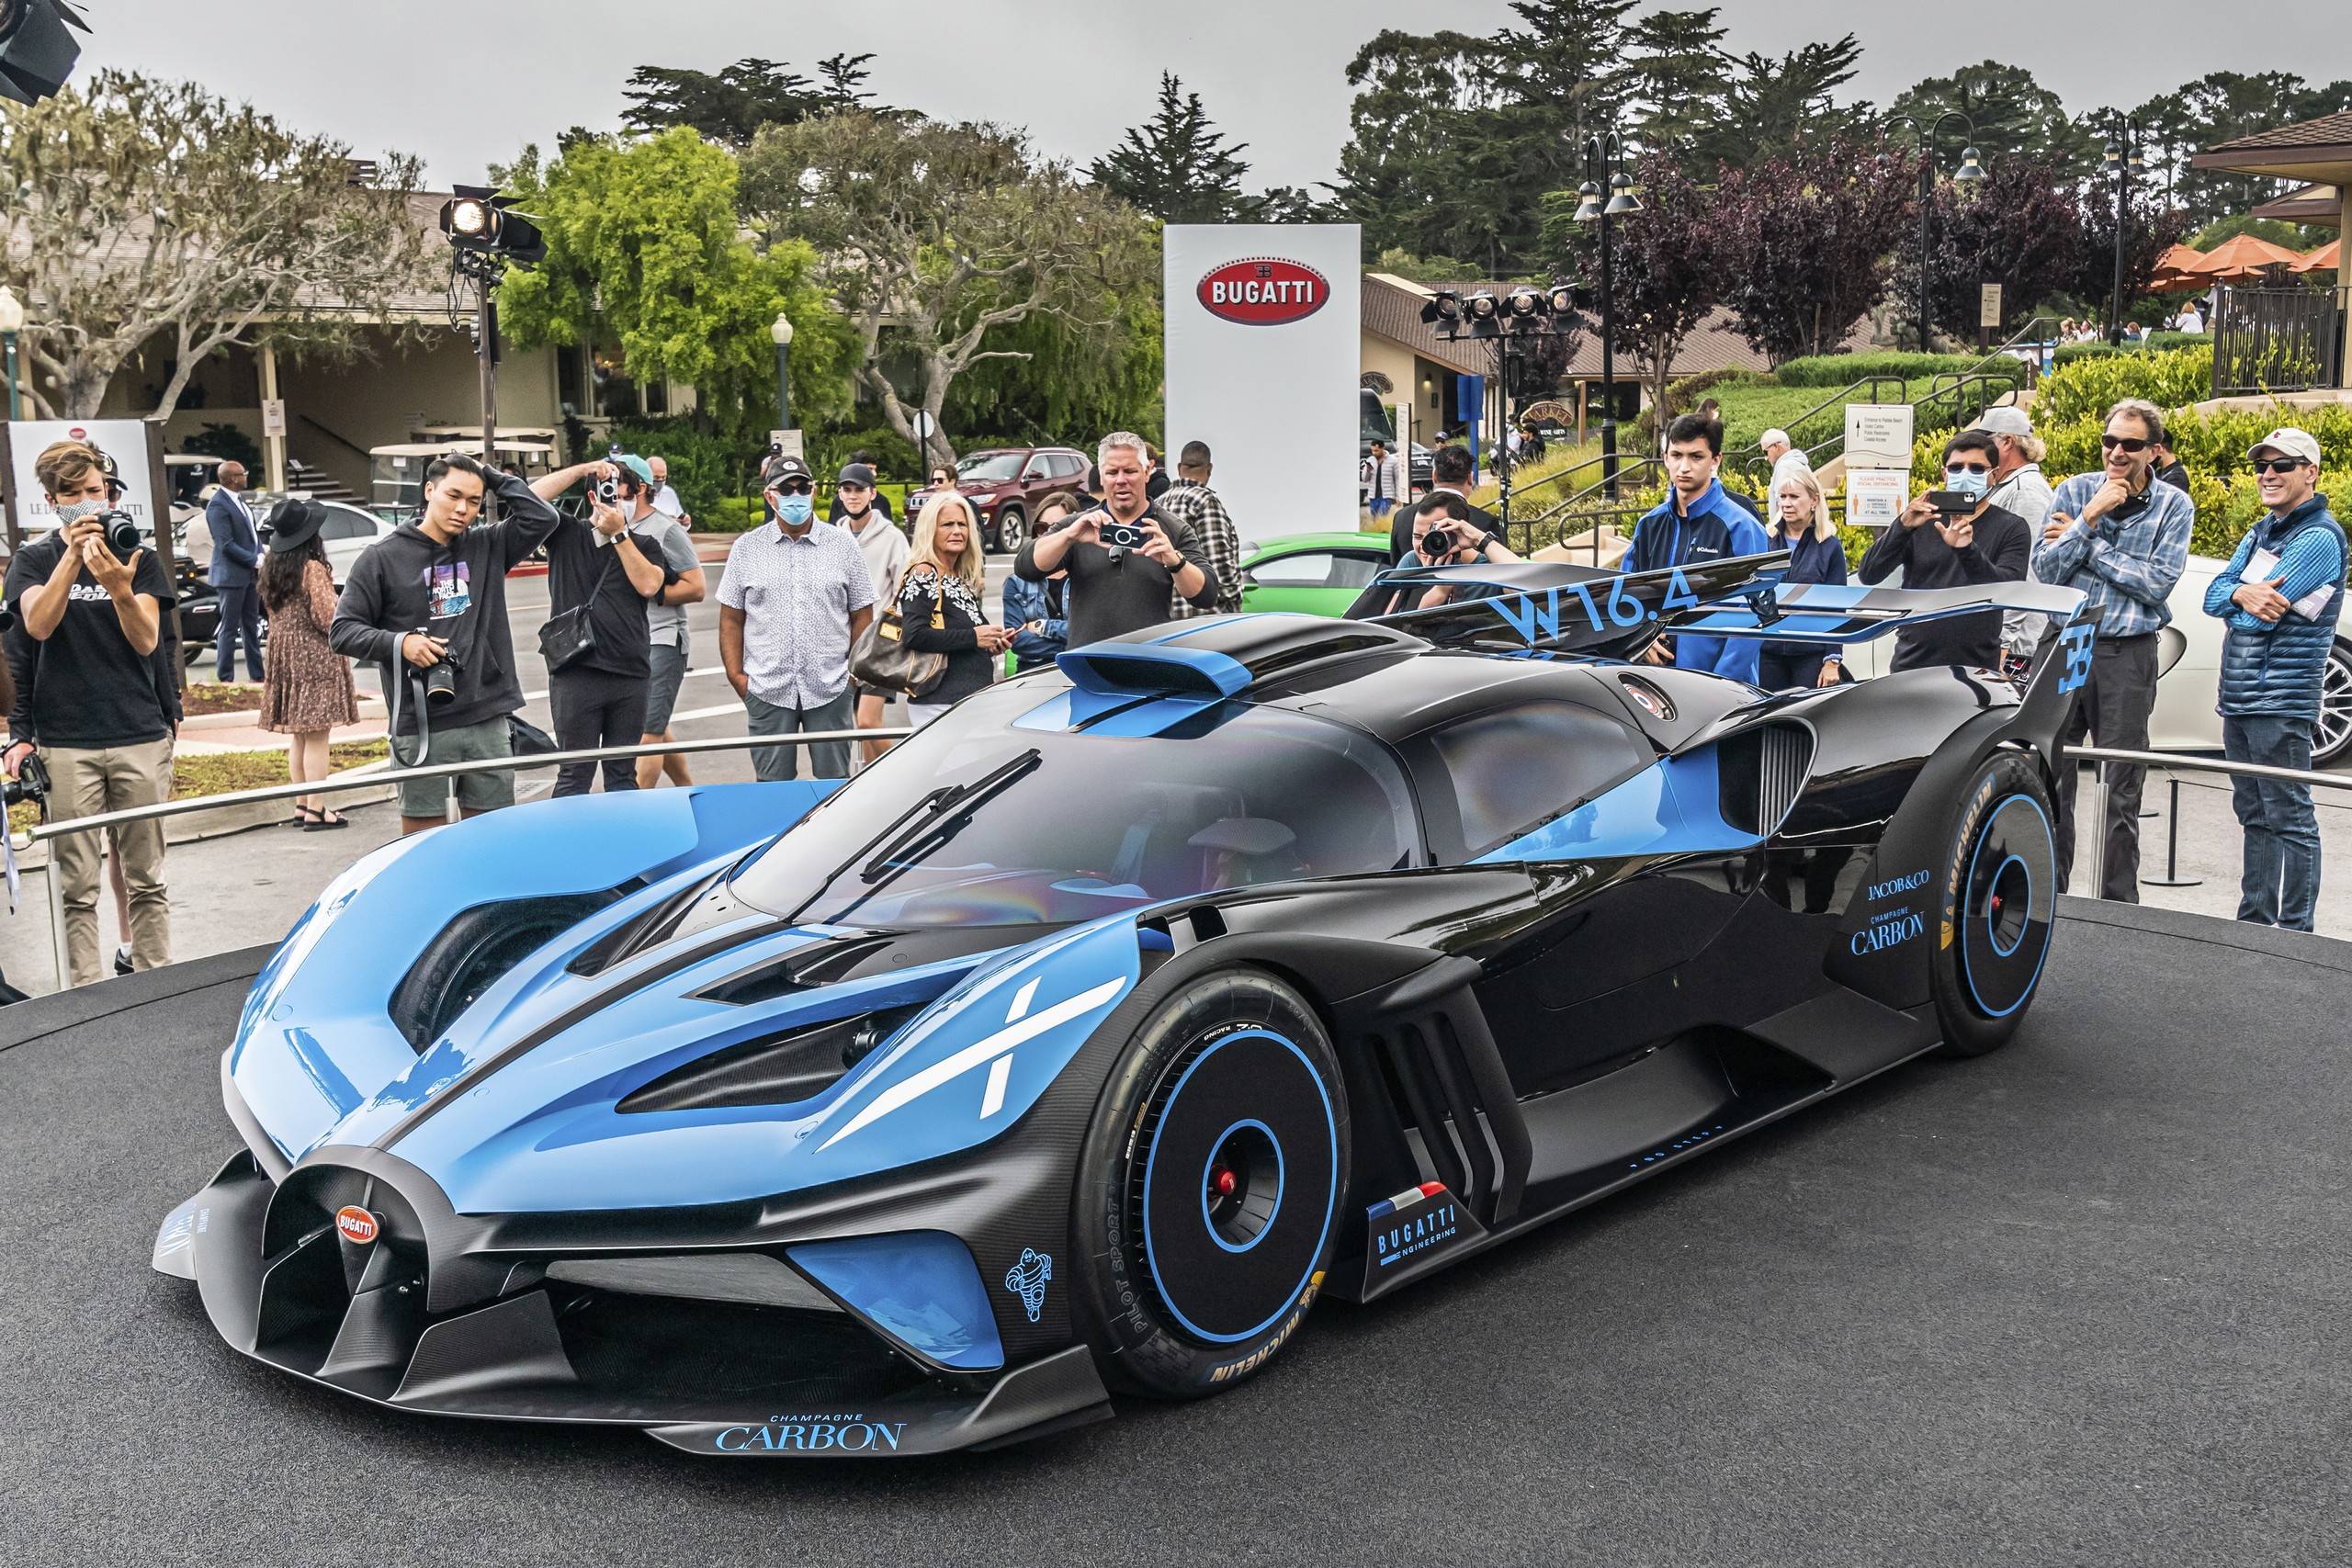 Bugatti Bolide Extreme Hypercar Drops Jaws at Monterey Car Week in